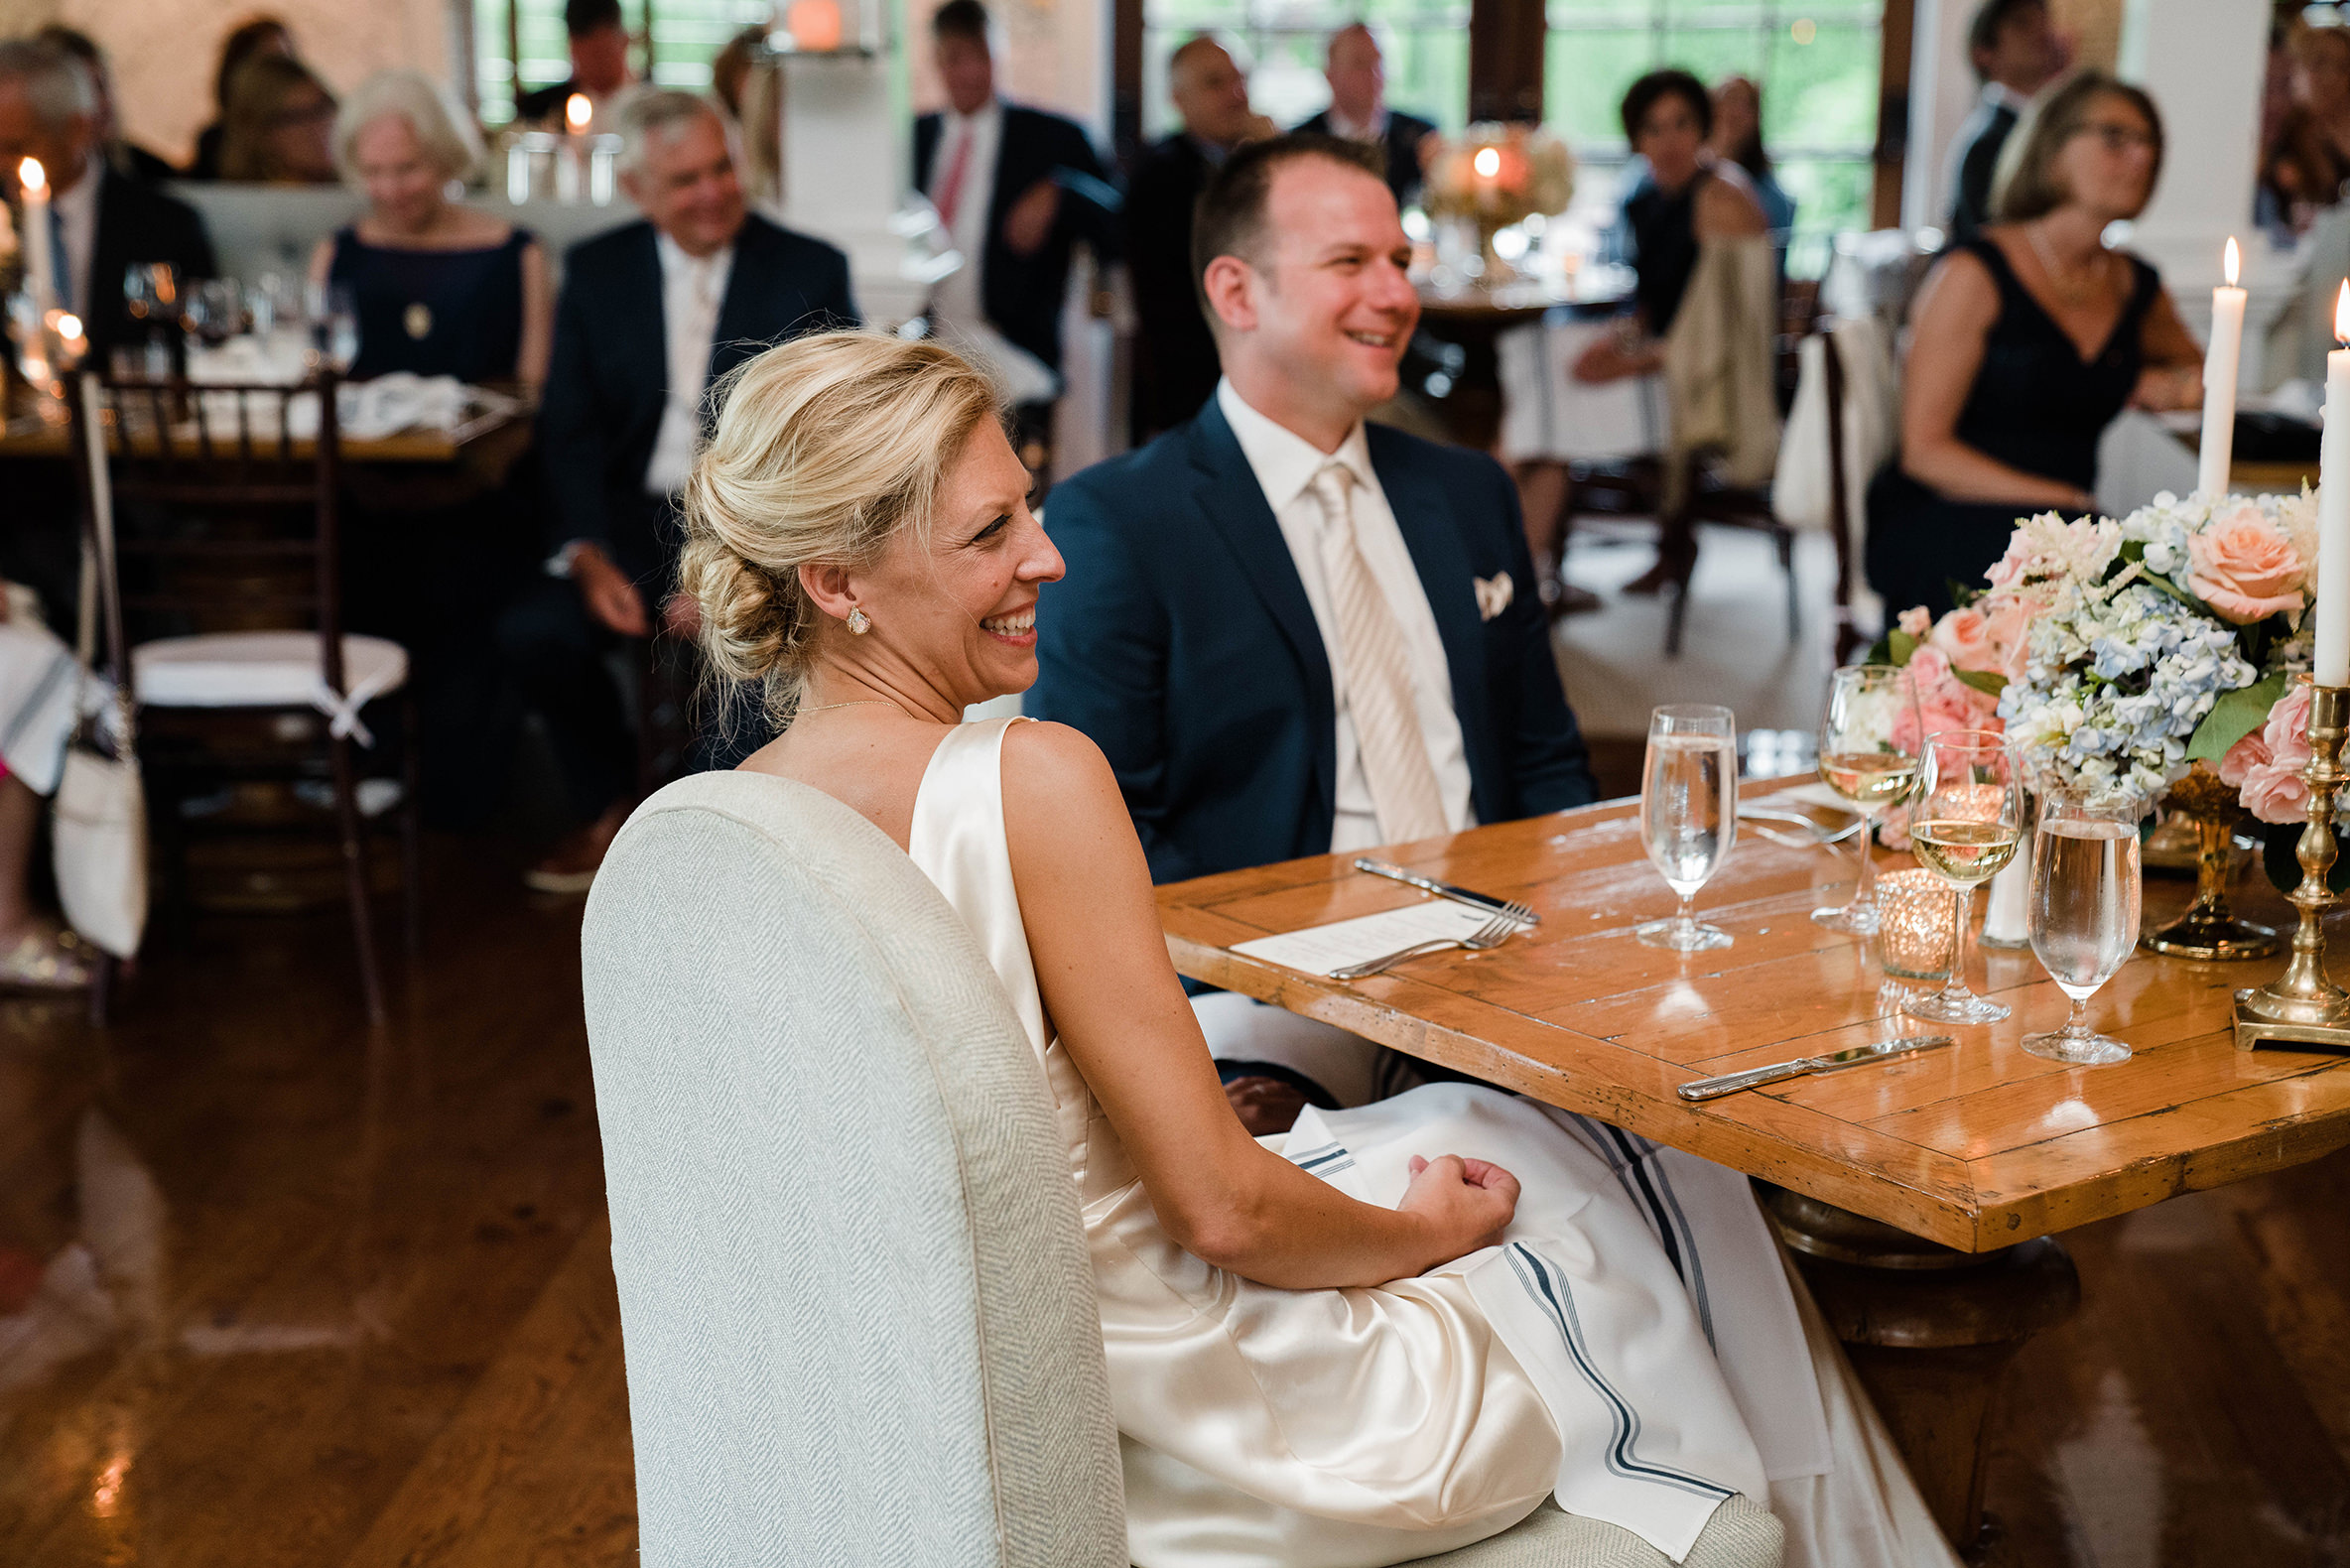 A documentary photograph featured in the best of wedding photography of 2019 showing a bride and groom laughing during the wedding toasts